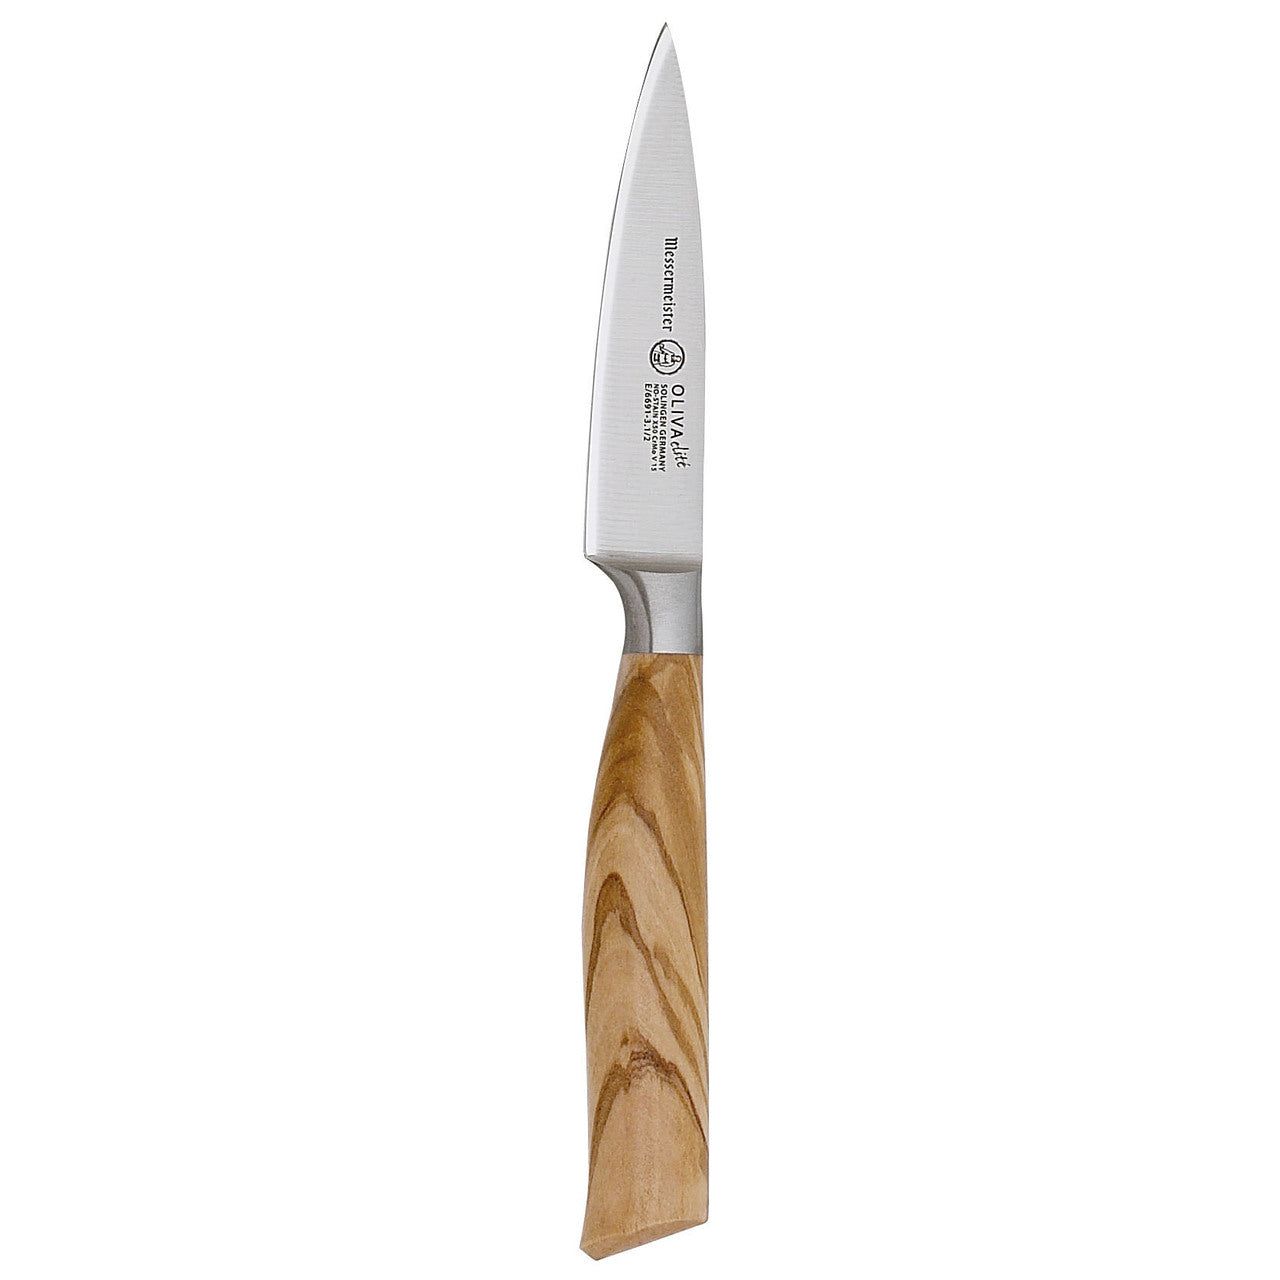 BEON.COM.AU E6691 3         Oliva Elite 3.5 Inch Spear Point Paring Knife You will find yourself using the Messermeister Oliva Elite 3.5 Inch Paring Knife daily for a variety of tasks requiring accuracy. This knife has a fine-edge blade that is designed to be an all-purpose knife, similar to a chef’s knife, ... Messermeister at BEON.COM.AU